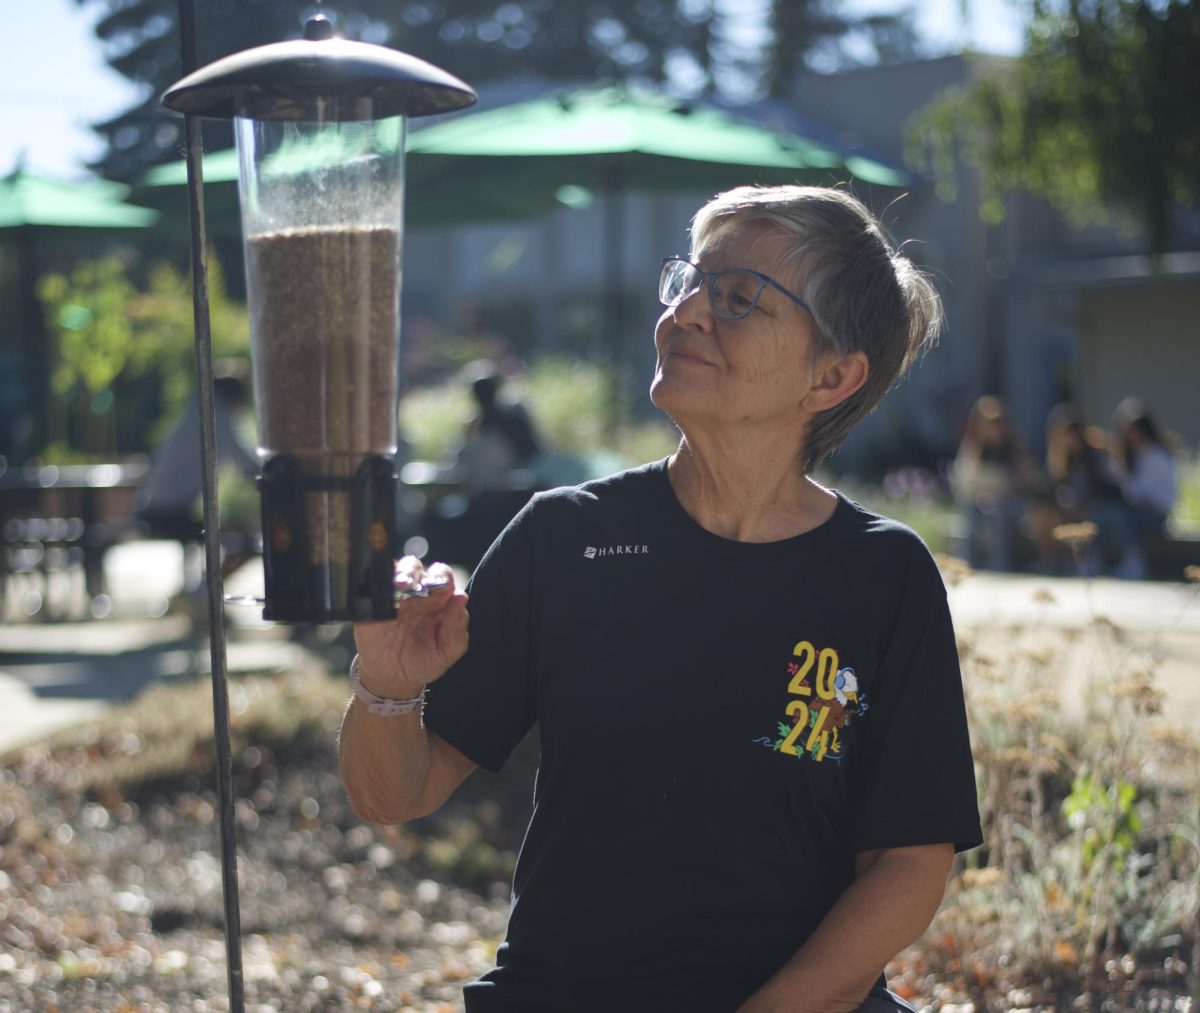 Upper school computer science teacher Susan King inspects a bird-feeder in the quad. Ms. King began bird watching in 2020, fascinated by their flight and plumage patterns.